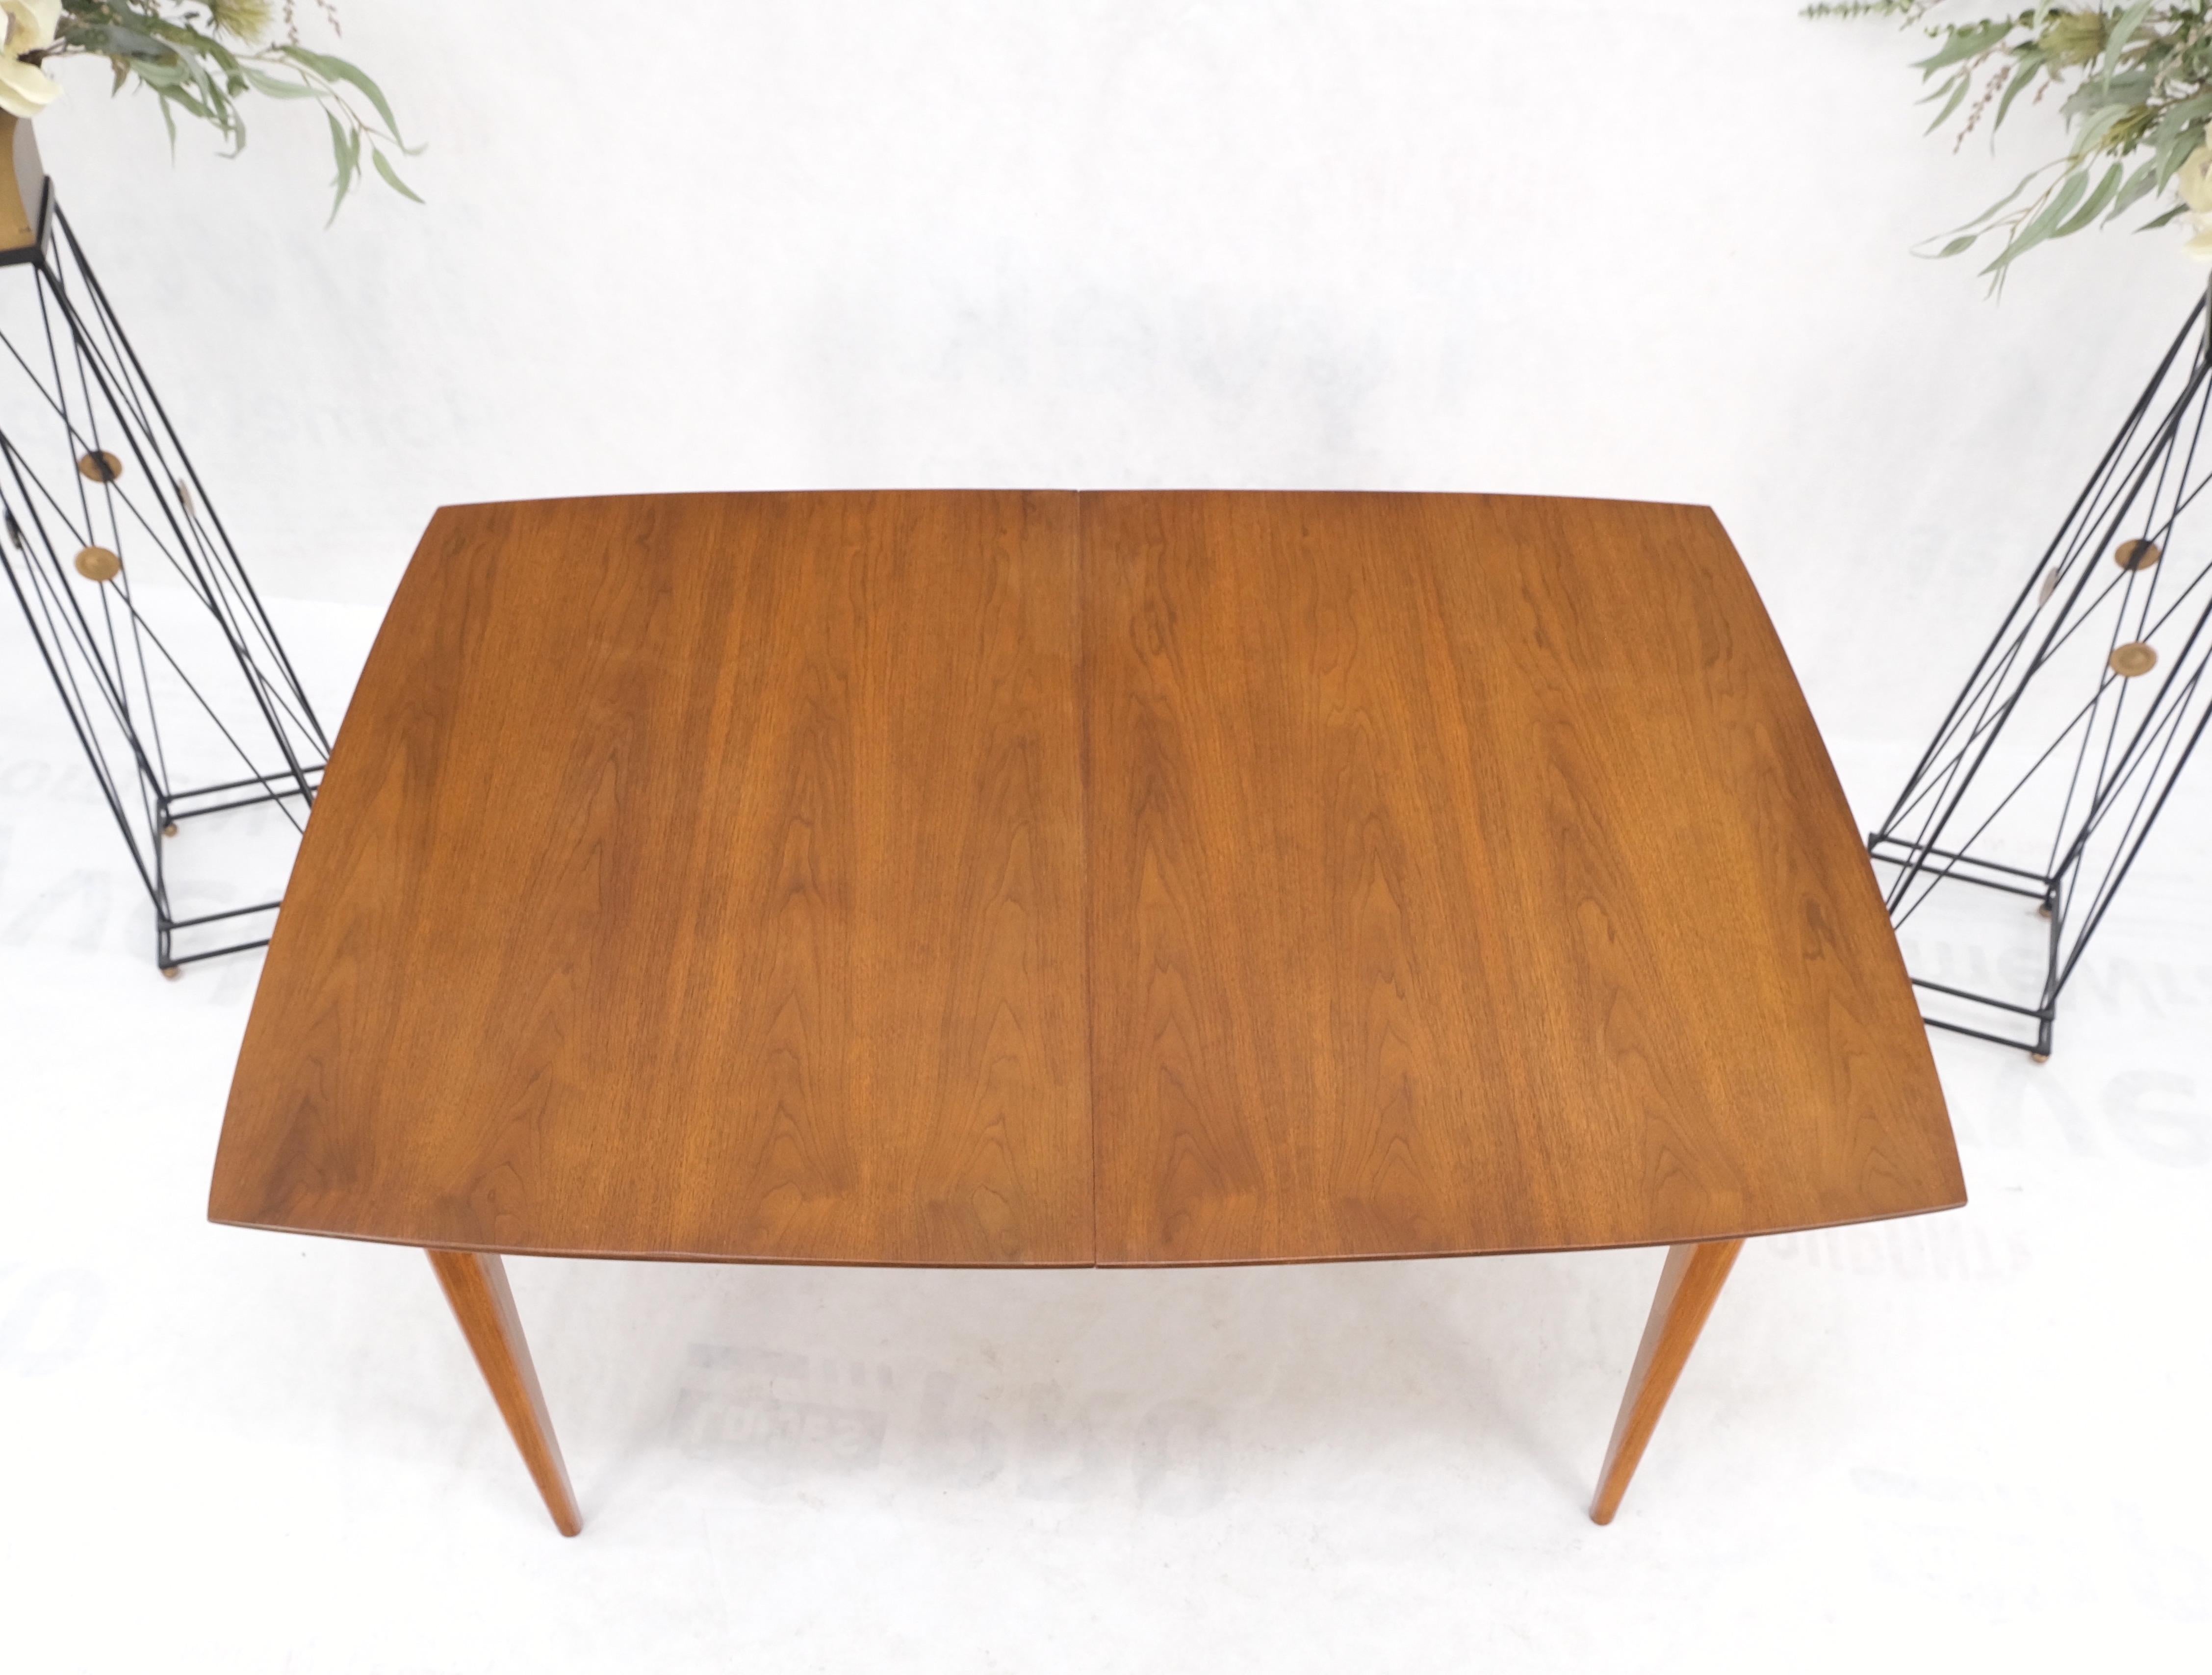 Lacquered Light Walnut American Mid-Century Modern Boat Shape Dining Table 3 Leaves Mint! For Sale